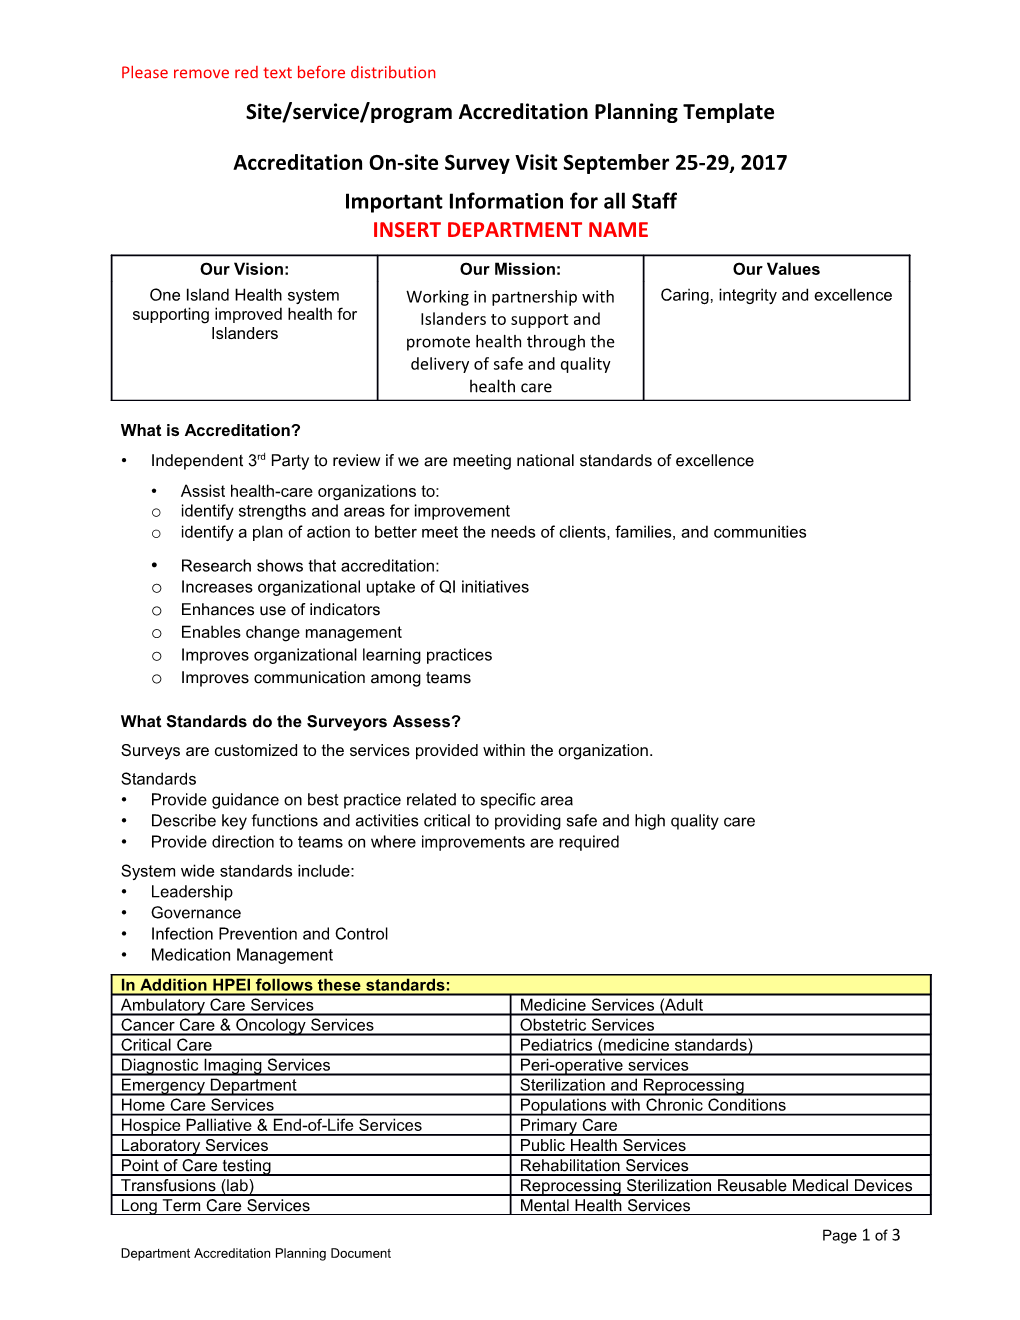 Department Accreditation Planning Template